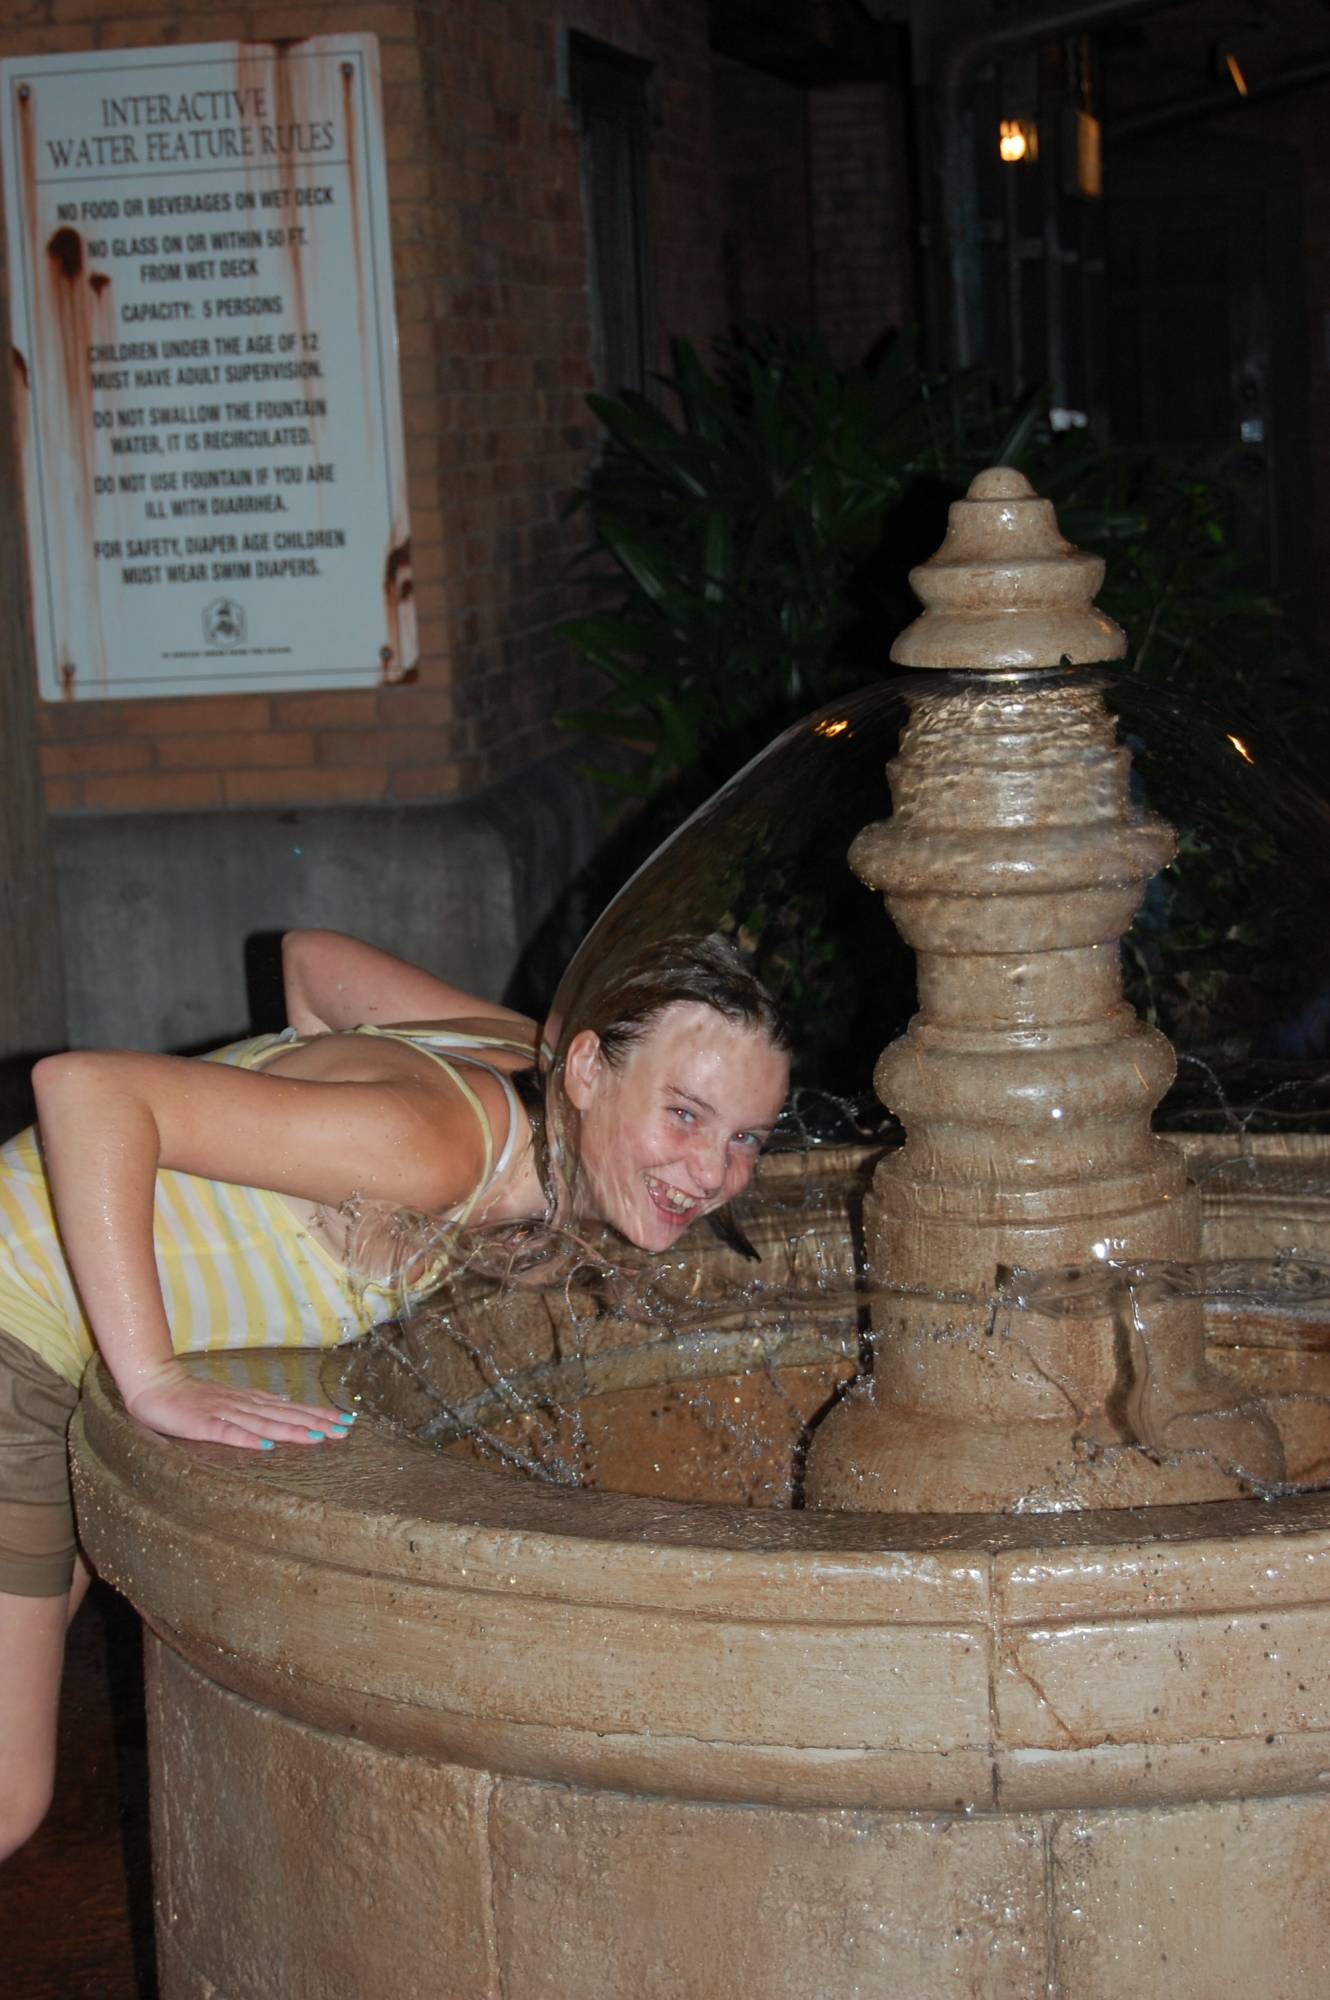 Goofing around in Asia and keeping cool!